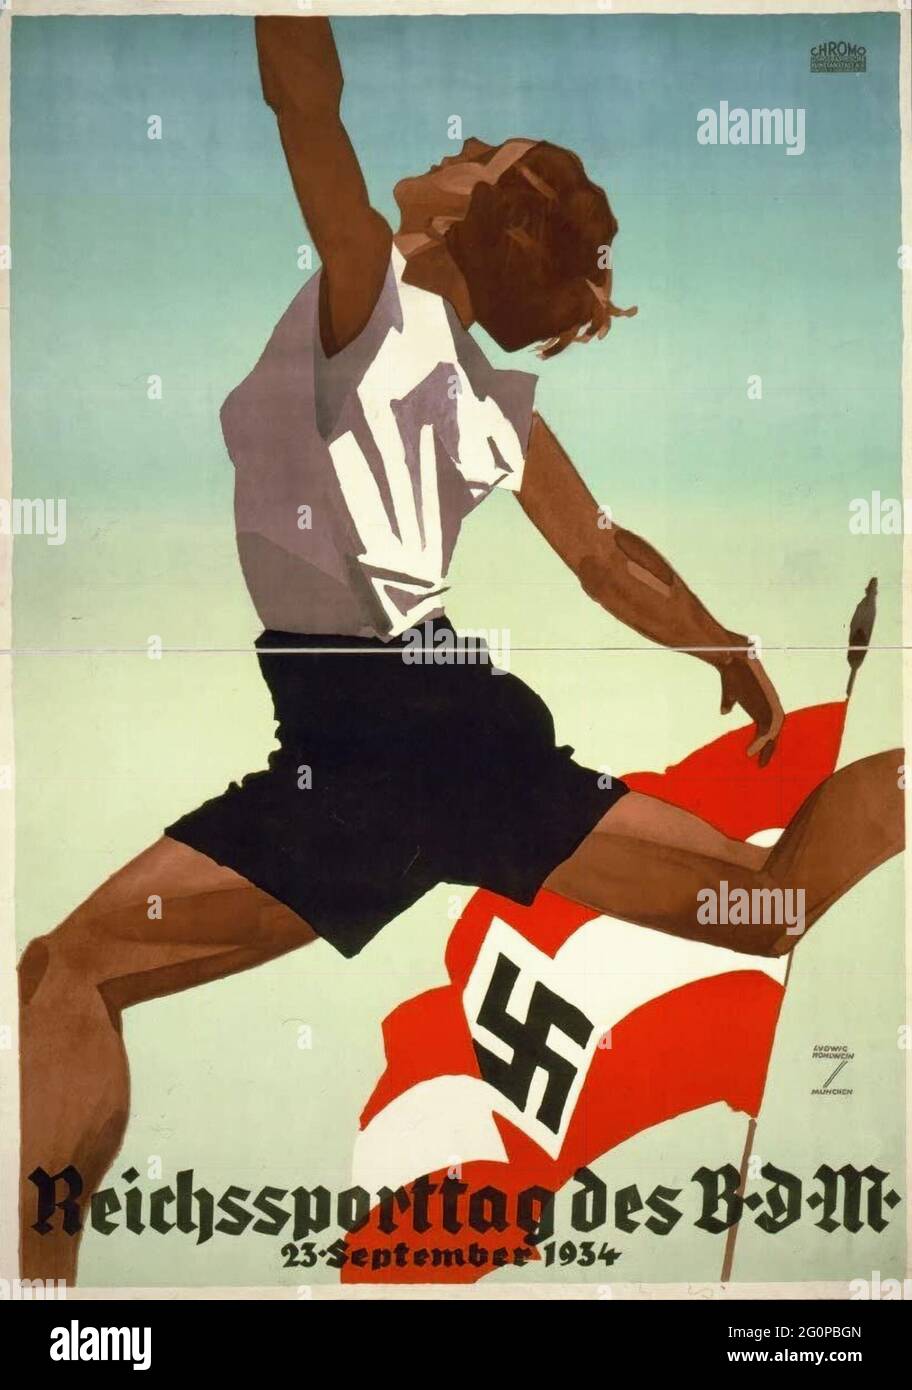 A vintage Nazi propaganda poster for the BDM (League of German Maidens) Reich sports day in September 1934 Stock Photo